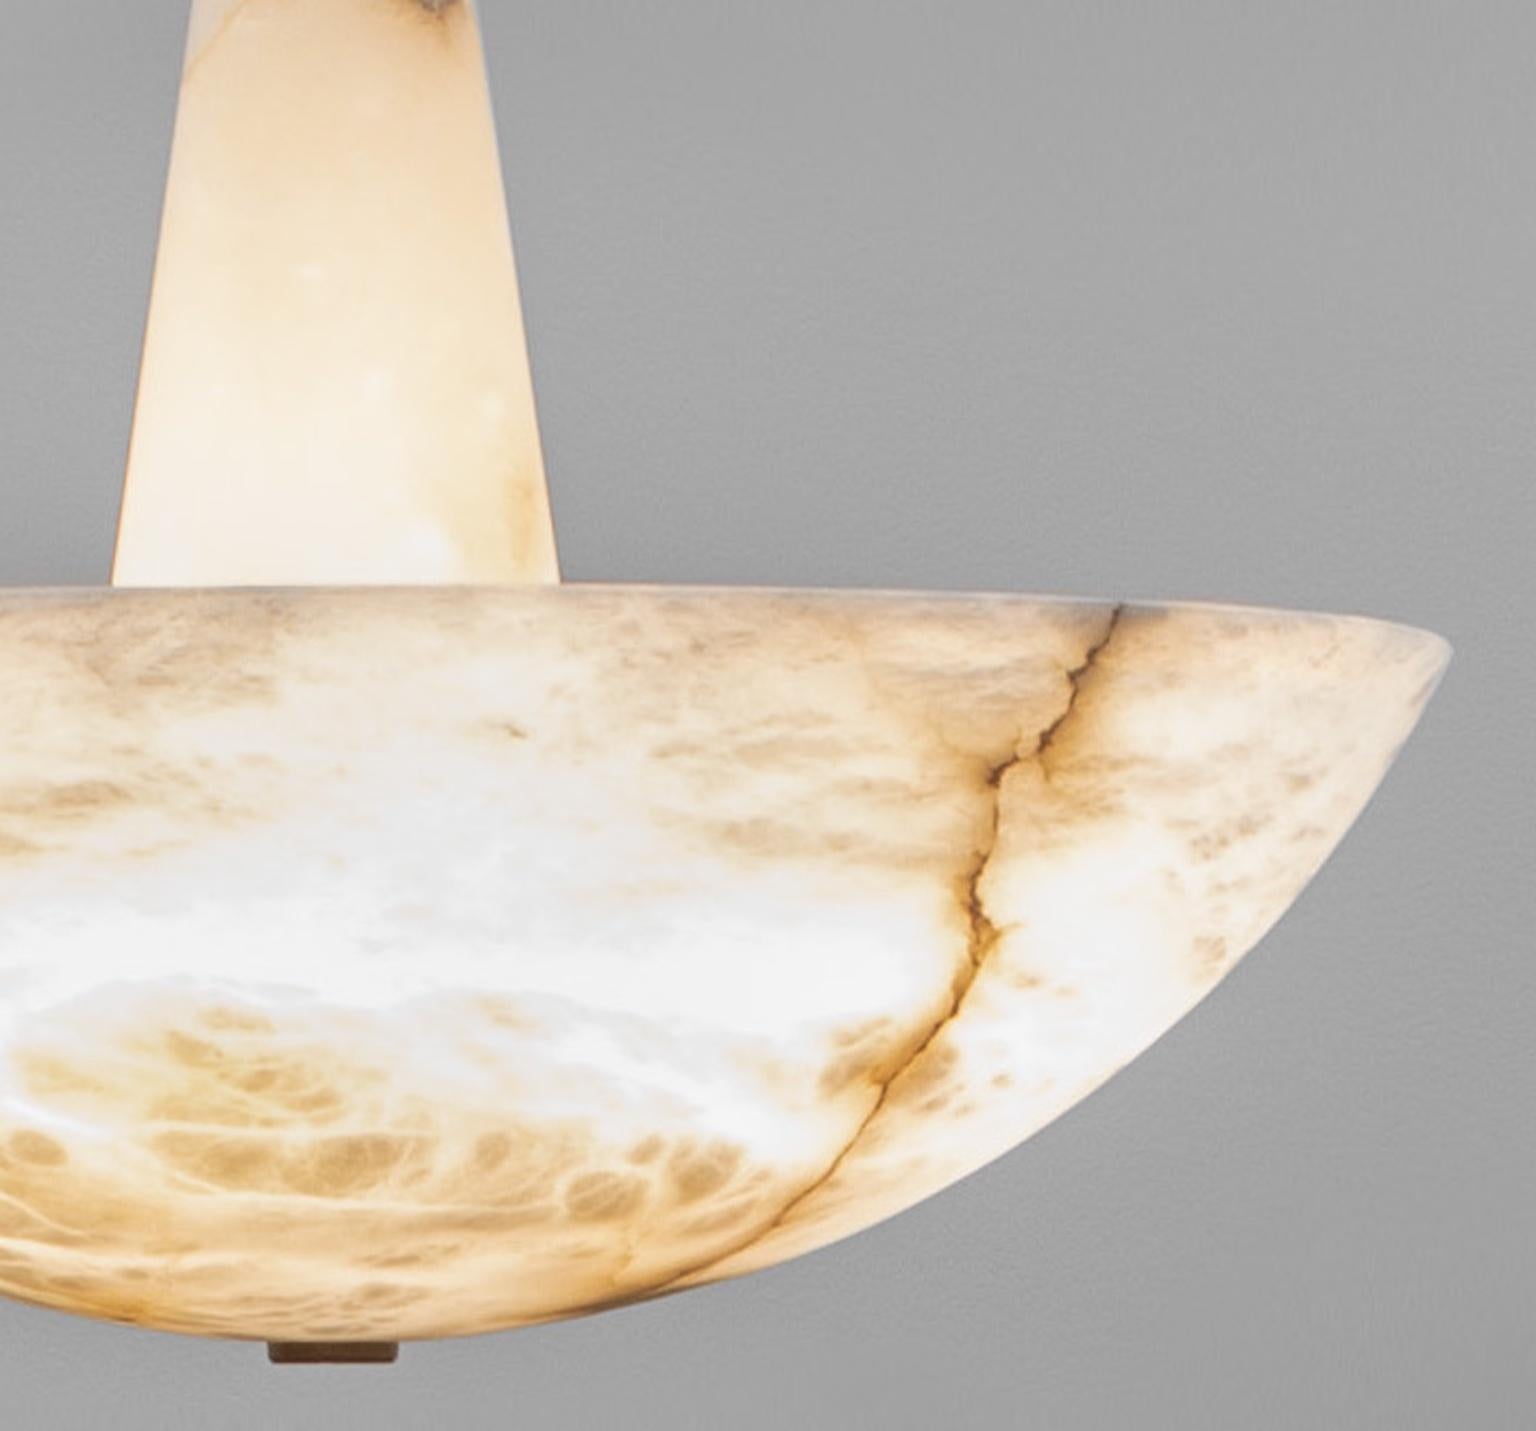 Pendant light by Garnier & Linker : Shade made out of veined Alabaster or Alabaster combined with dark natural brass patina. A 